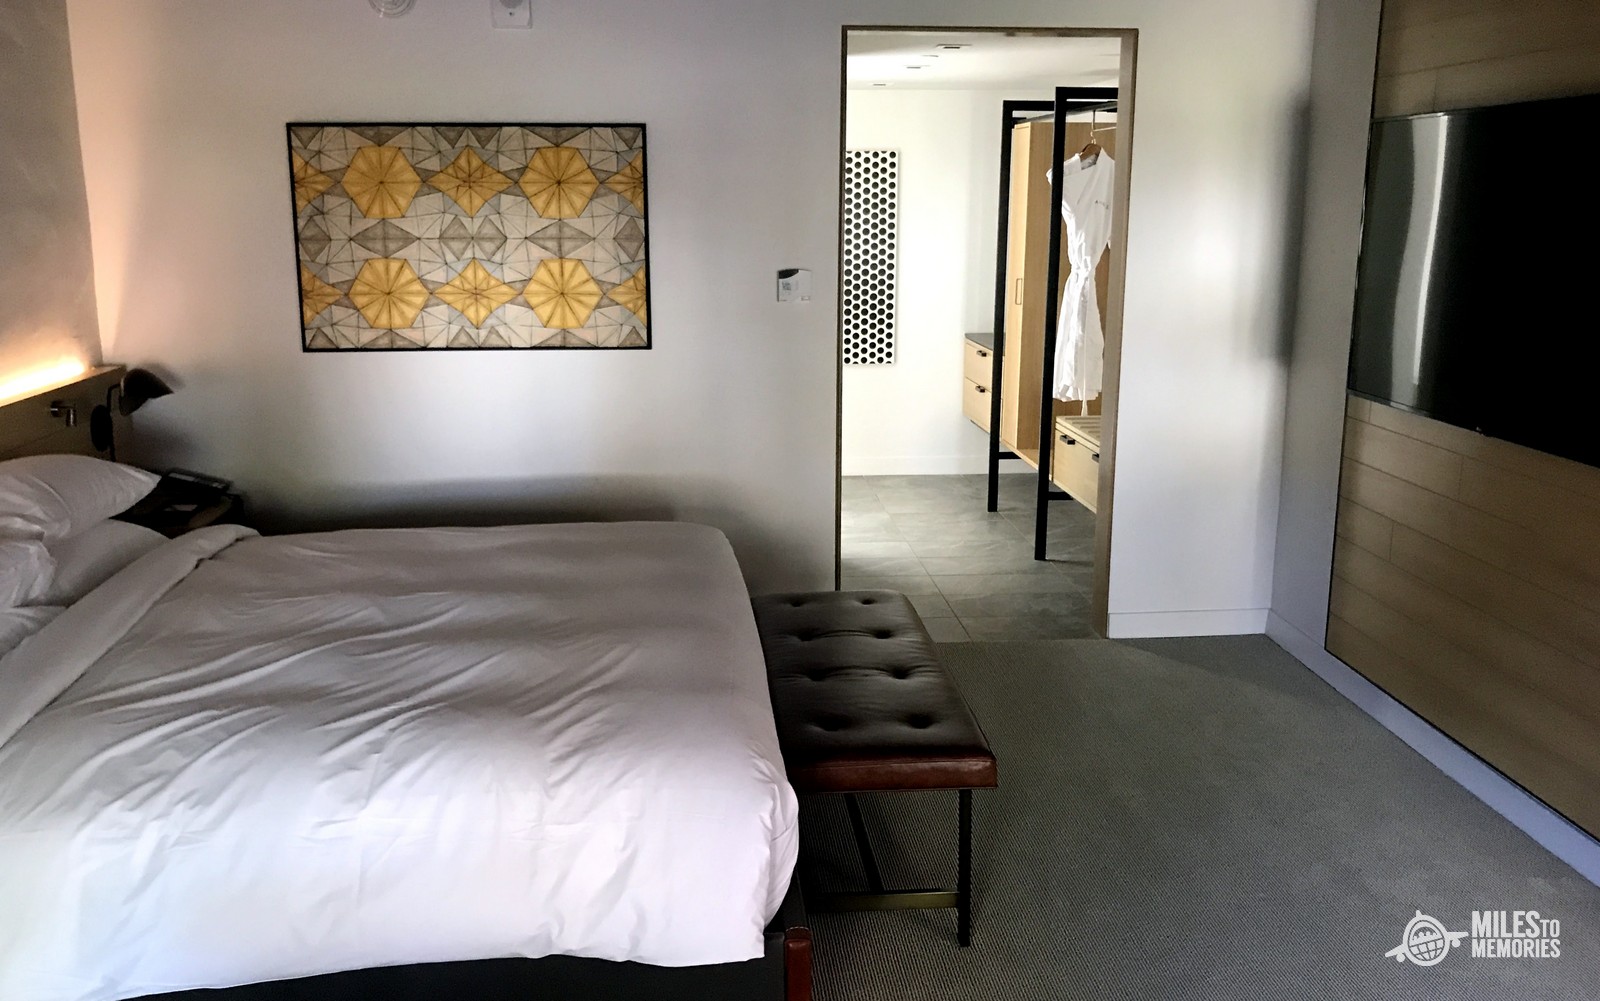 Andaz Scottsdale Hotel Review